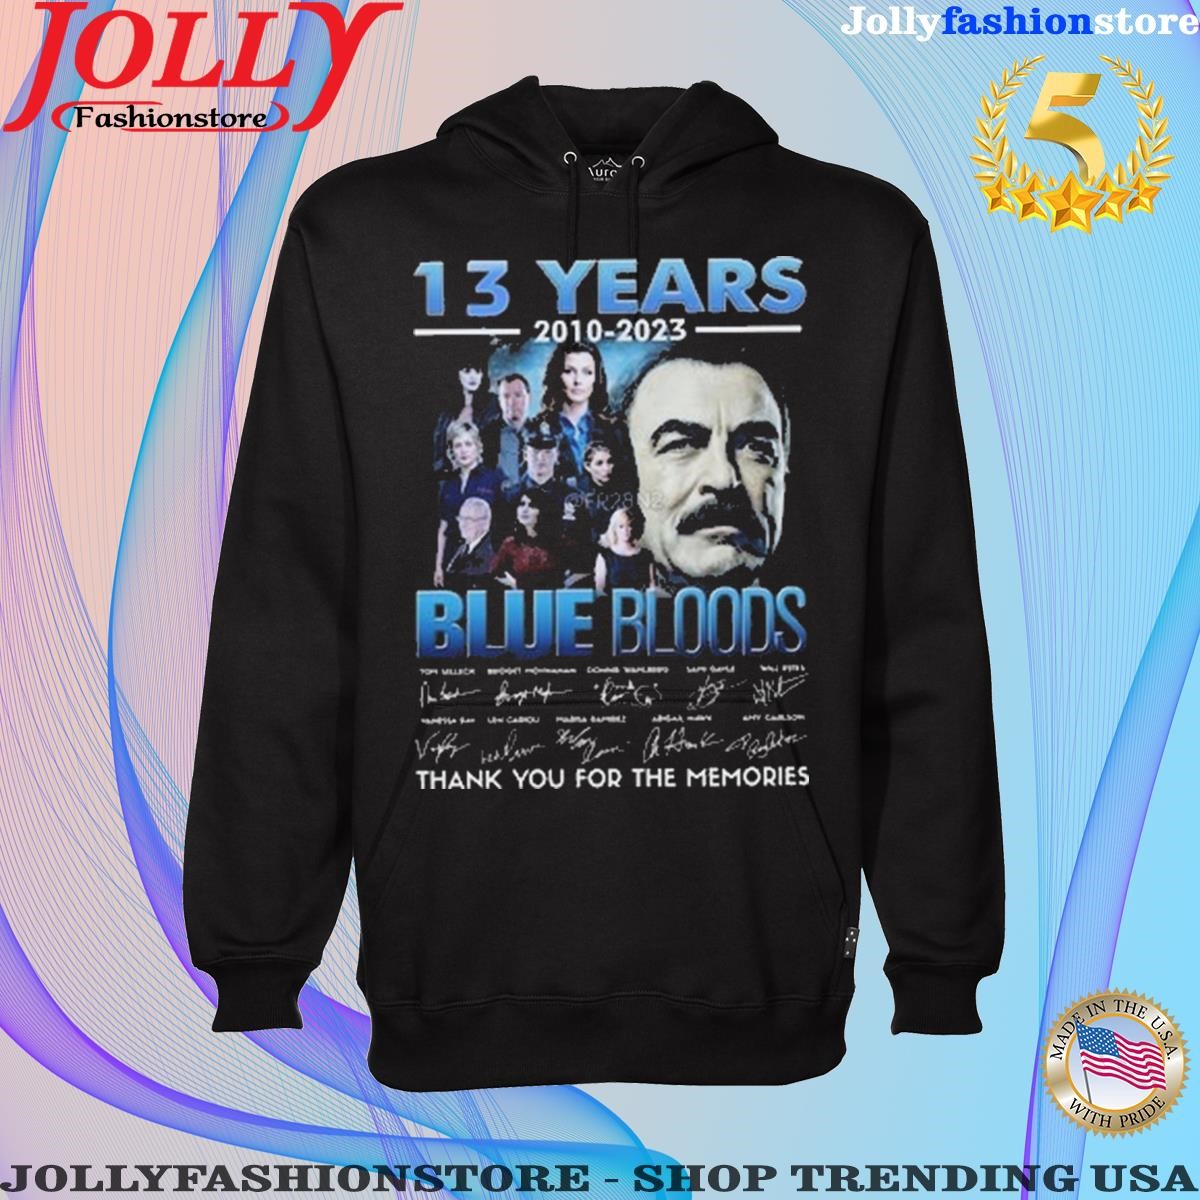 13 years 2010 2023 blue bloods thank you for the memories signatures Hoodie shirt.png